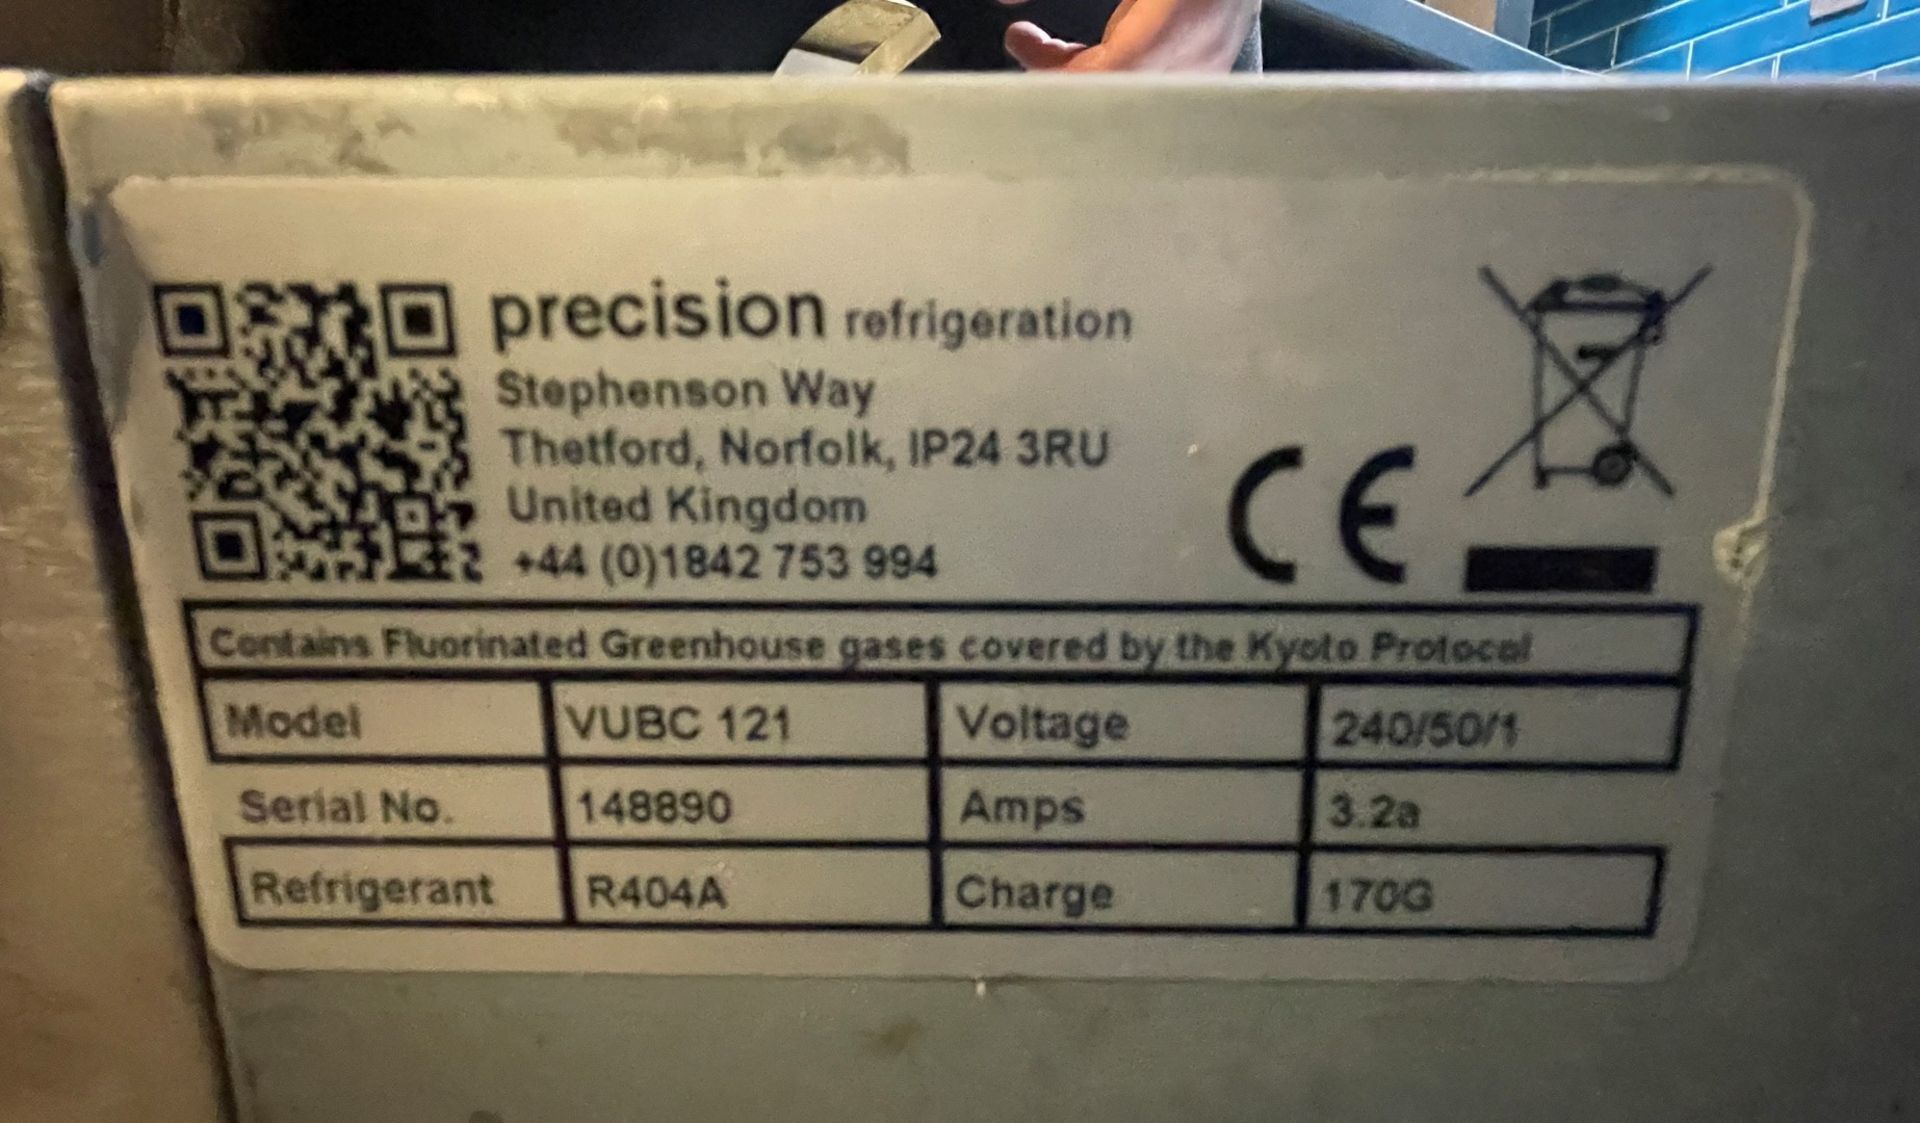 1 x Precision VUBC 121 Variable Temperature Refridgerated Drawer - Can Be Operated as Refrigerator - Image 2 of 2